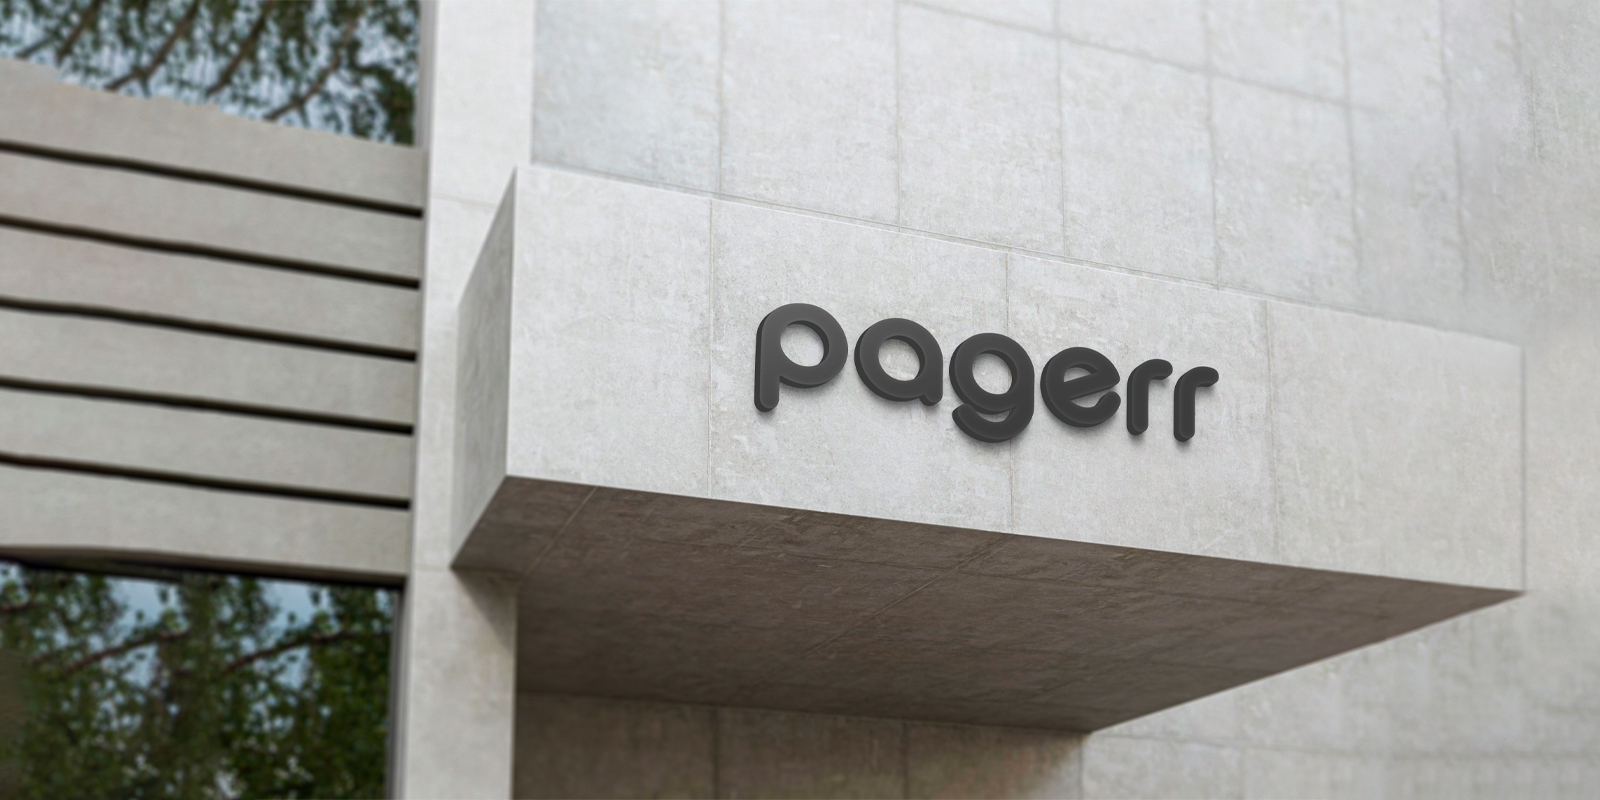 Logo signs in Darwin - Print with Pagerr